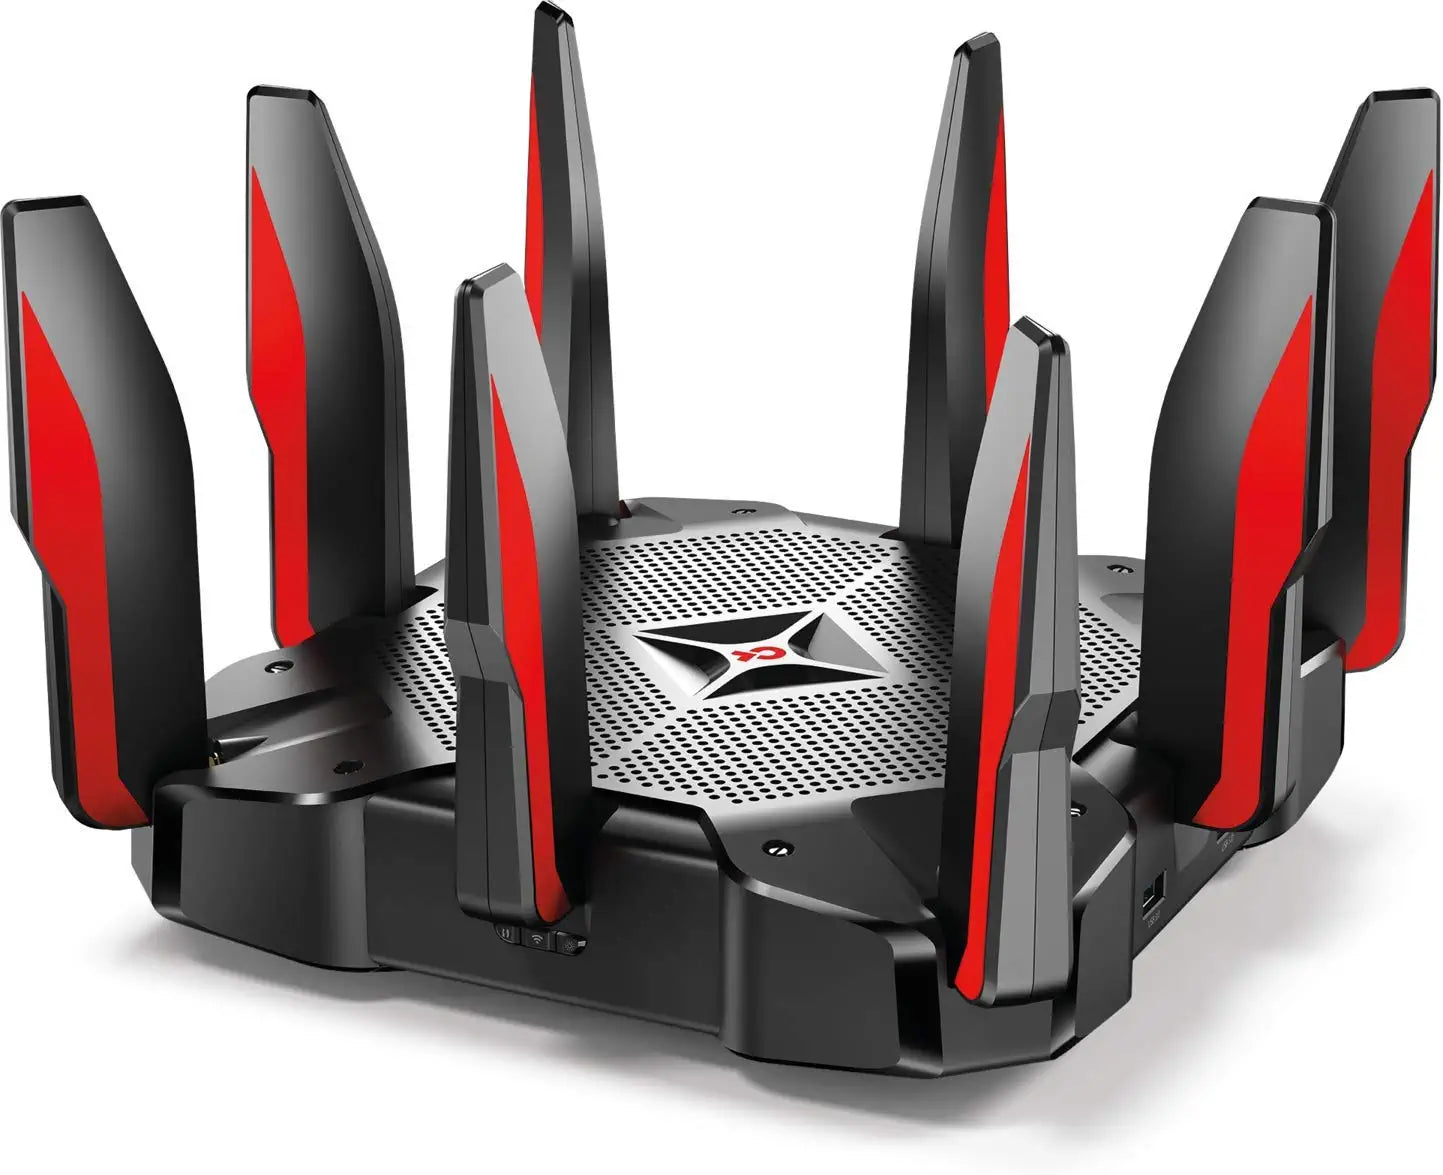 TP-Link AC5400 Tri Band WiFi Gaming Router(Archer C5400X) √É¬¢√¢‚Äö¬¨√¢‚Ç¨≈ì MU-MIMO Wireless Router, 1.8GHz Quad-Core 64-bit CPU, Game First Priority, Link Aggregation, 16GB Storage, Airtime Fairness